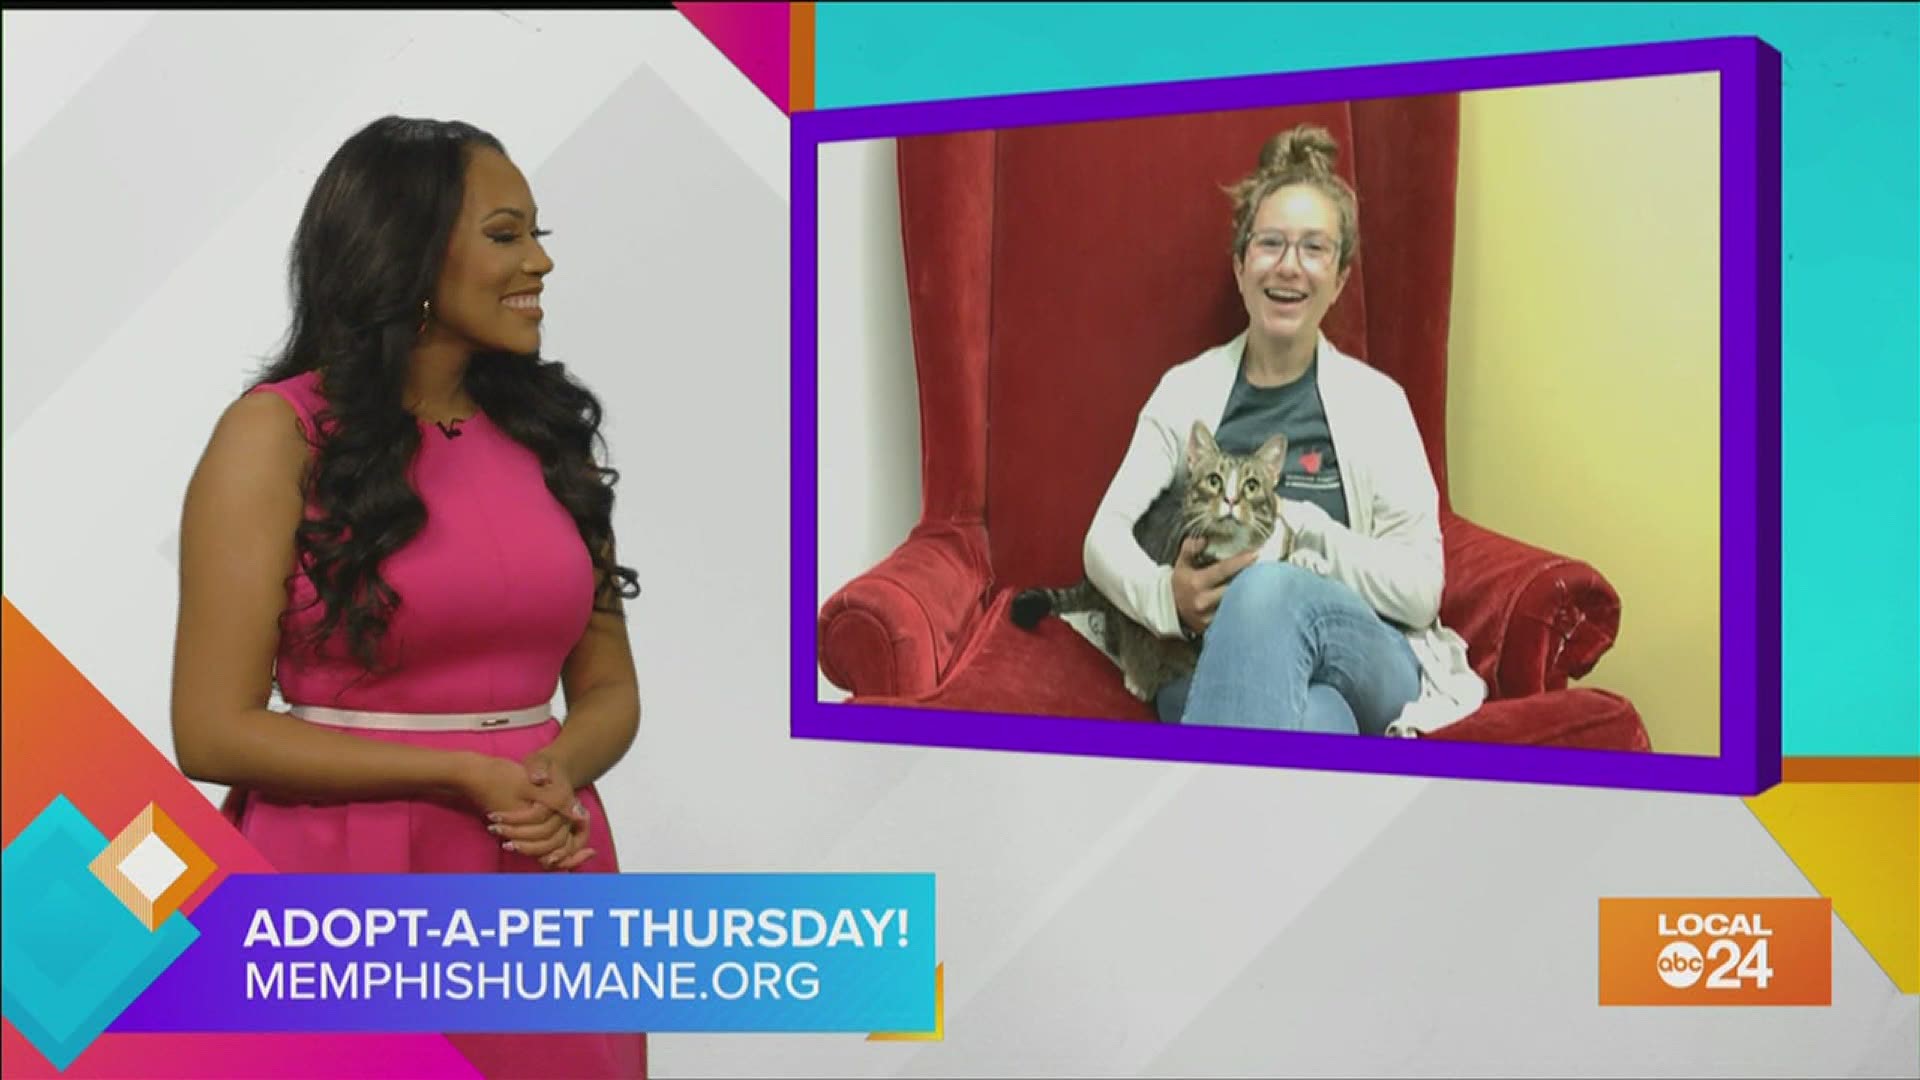 Whether you're looking to adopt a furry friend or help out those in need, check out what the Memphis Humane Society has to offer! :)